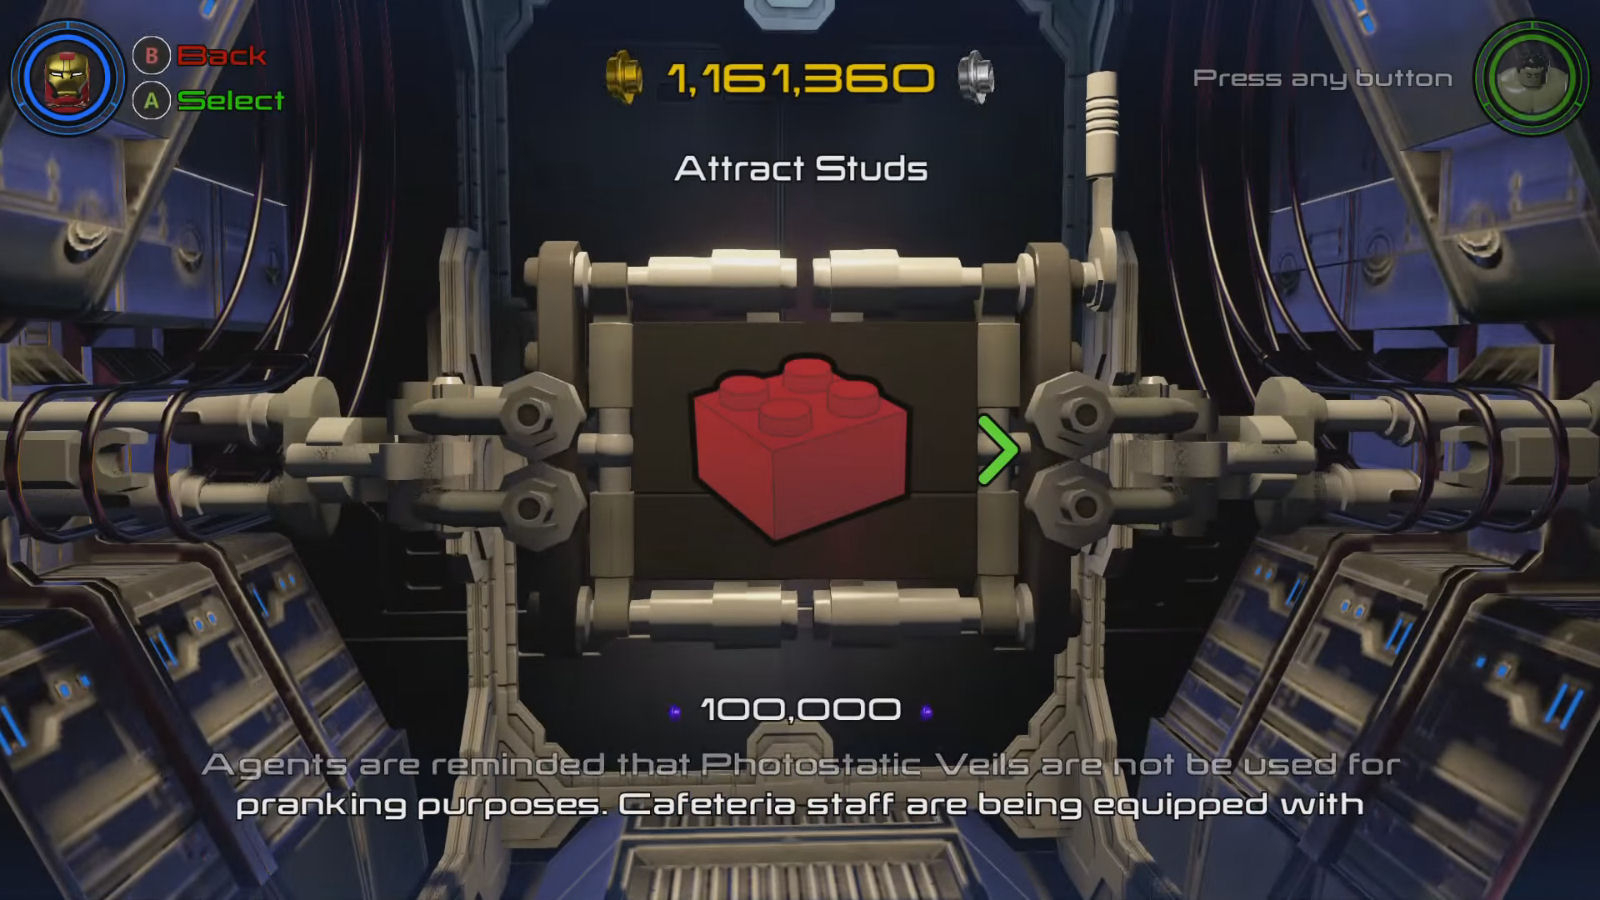 Lego Marvel&#039;S Avengers Red Brick 1: Attract Studs Location with Lego Marvel Avengers Codes